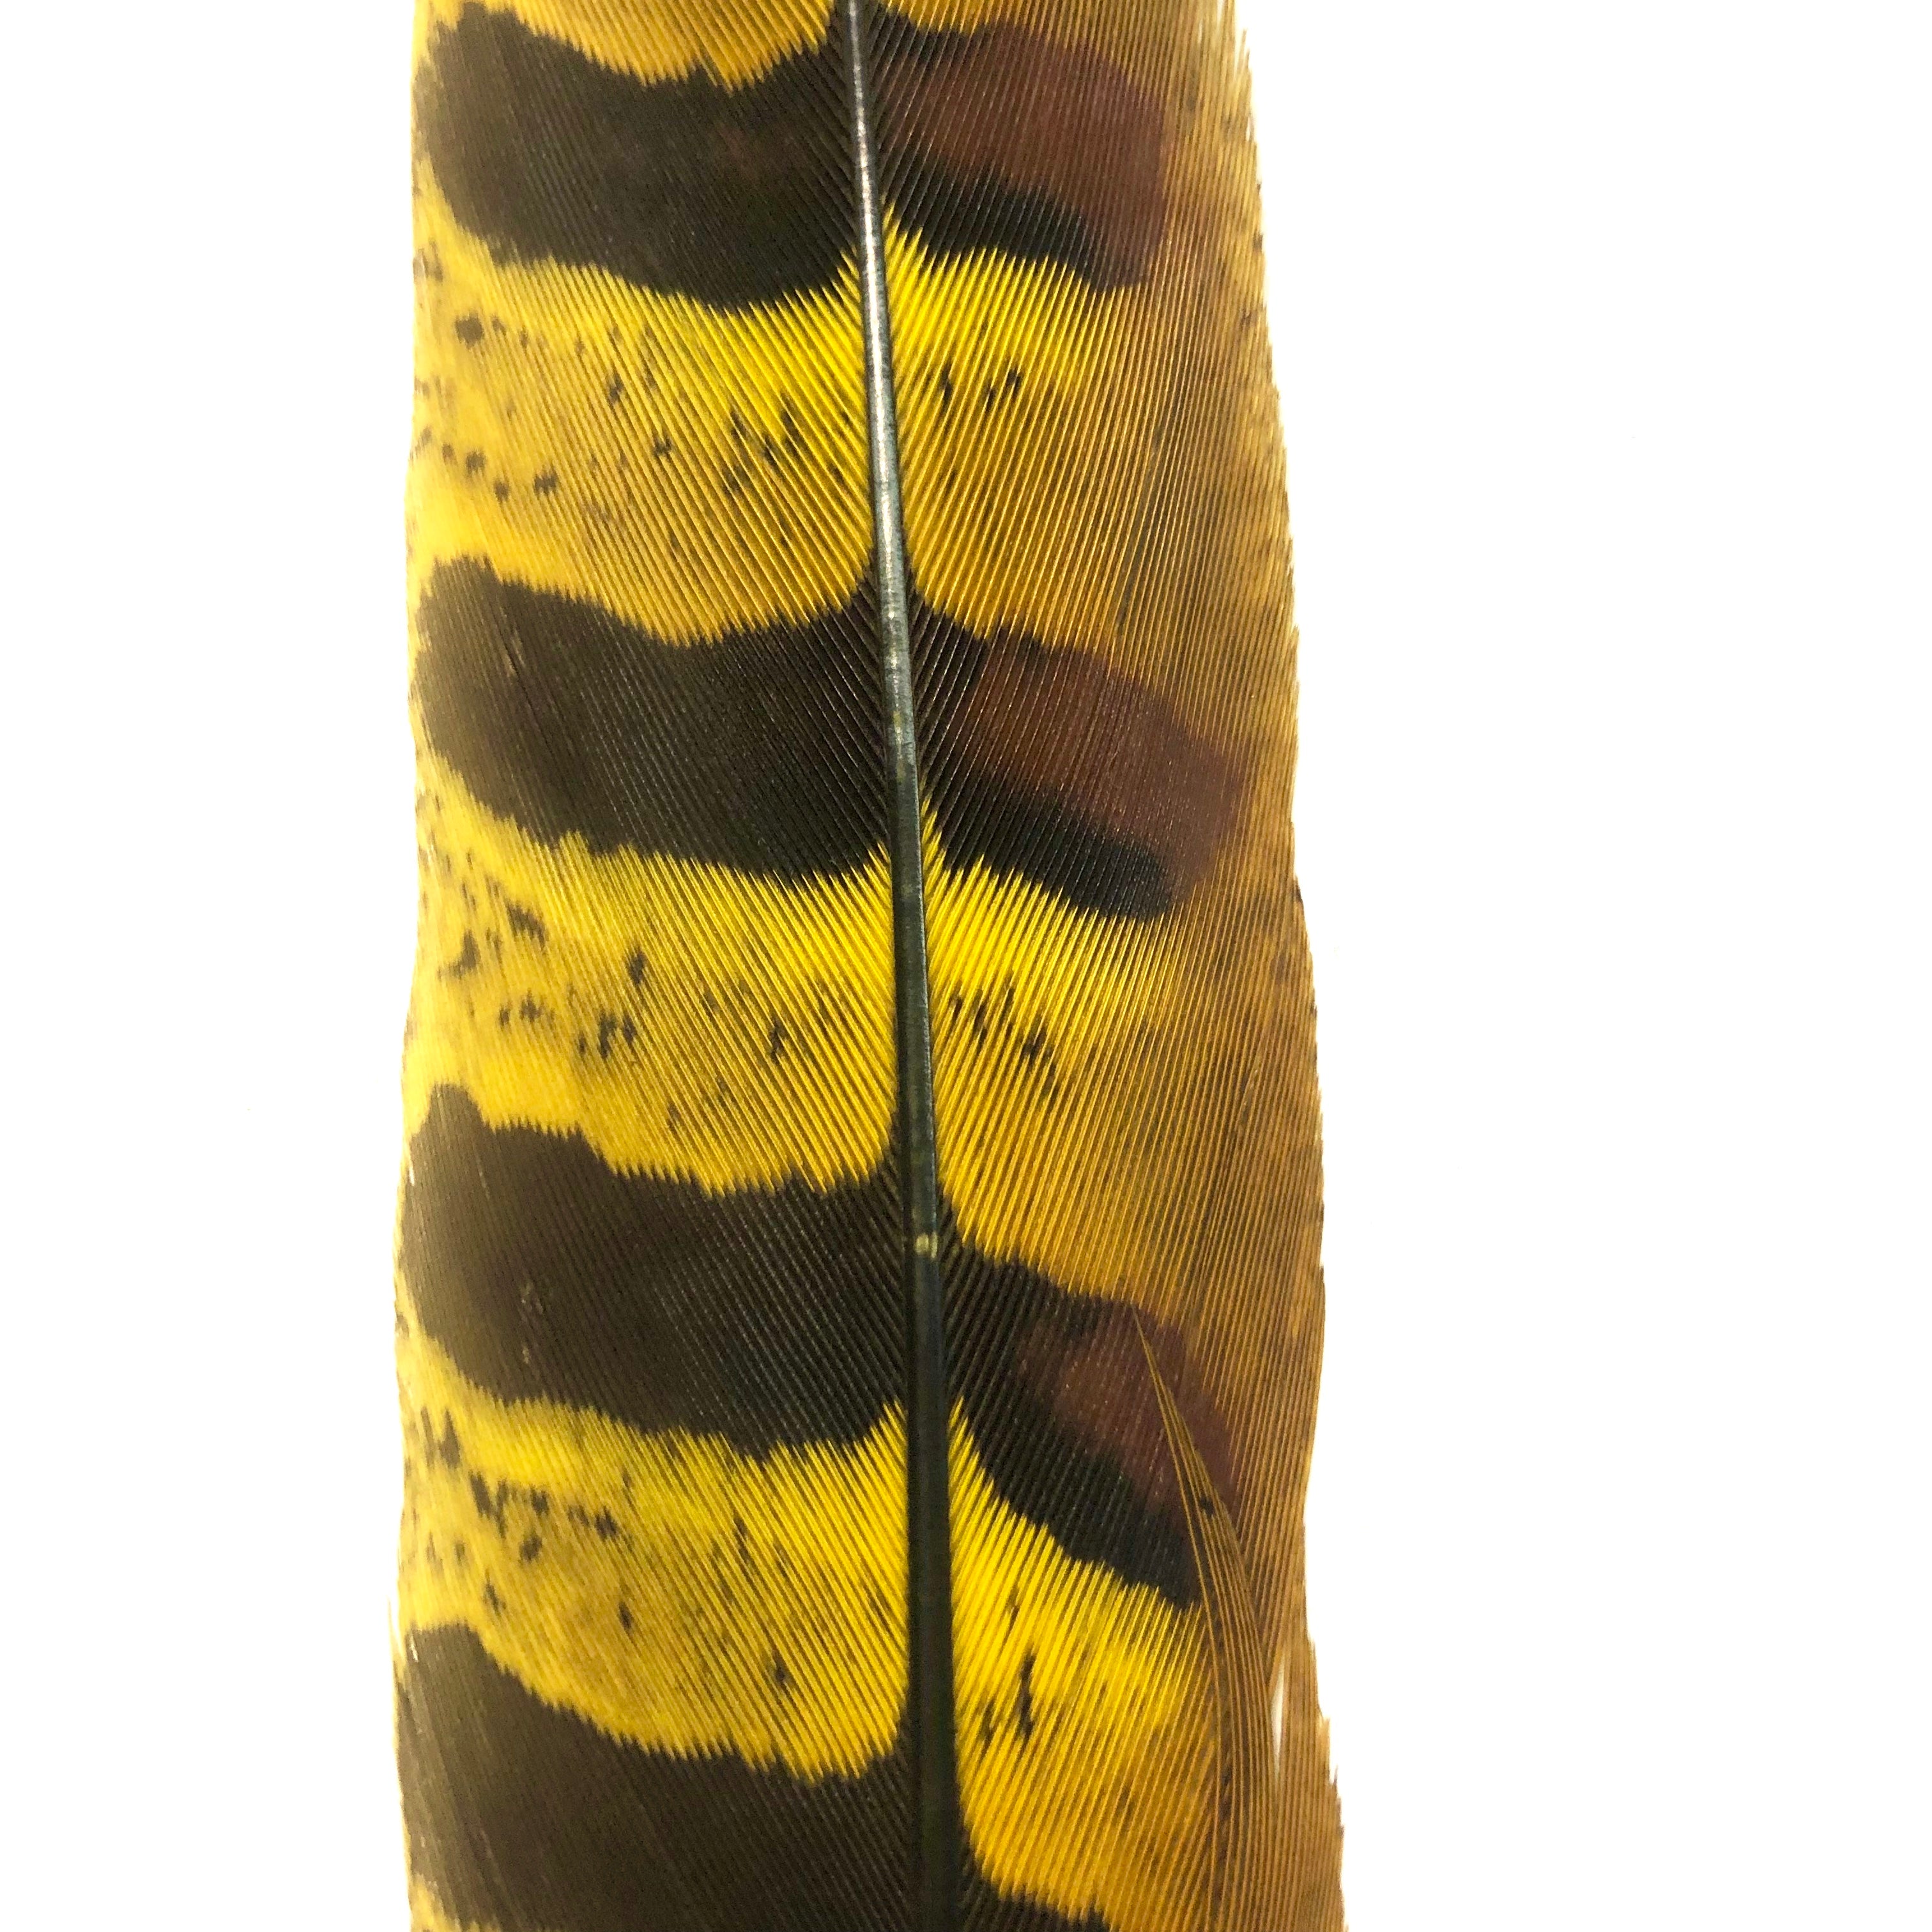 8" to 10" Reeves Pheasant Tail Feather - Yellow